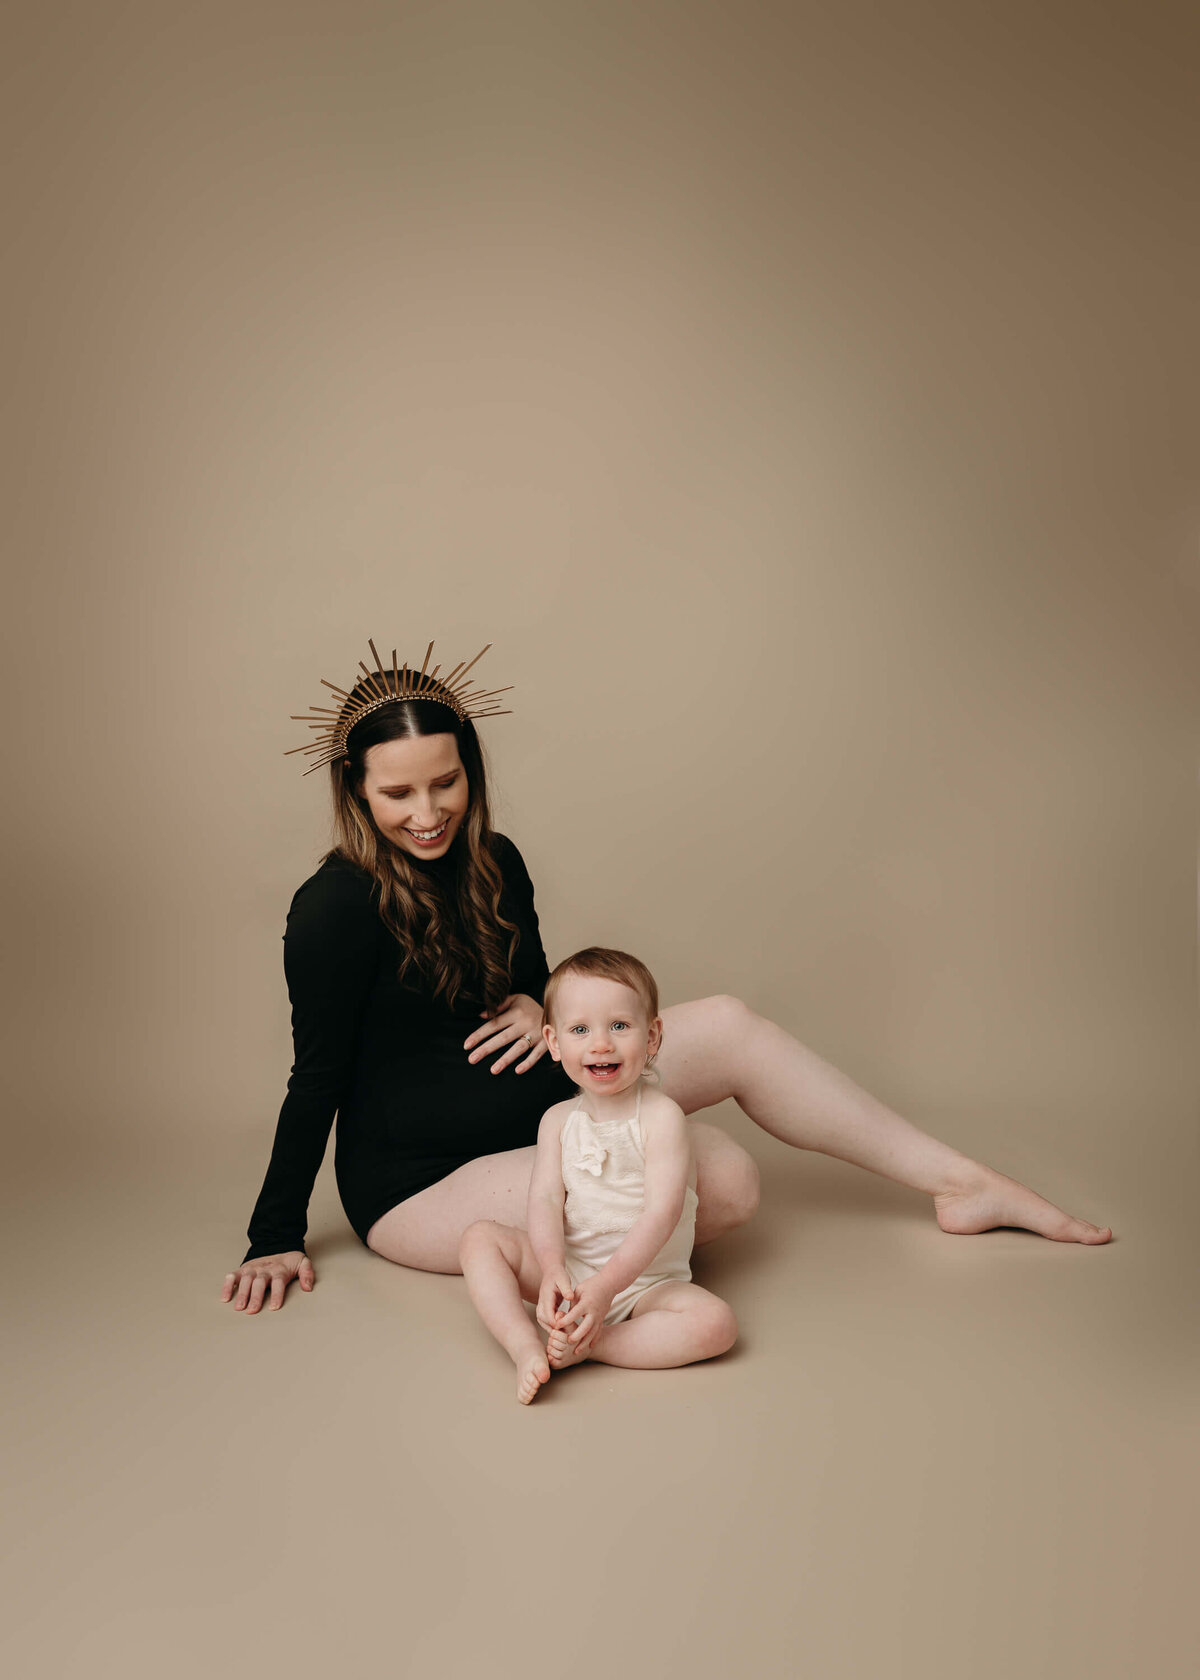 Maternity Studio Session with hair and make upWeb Res 22